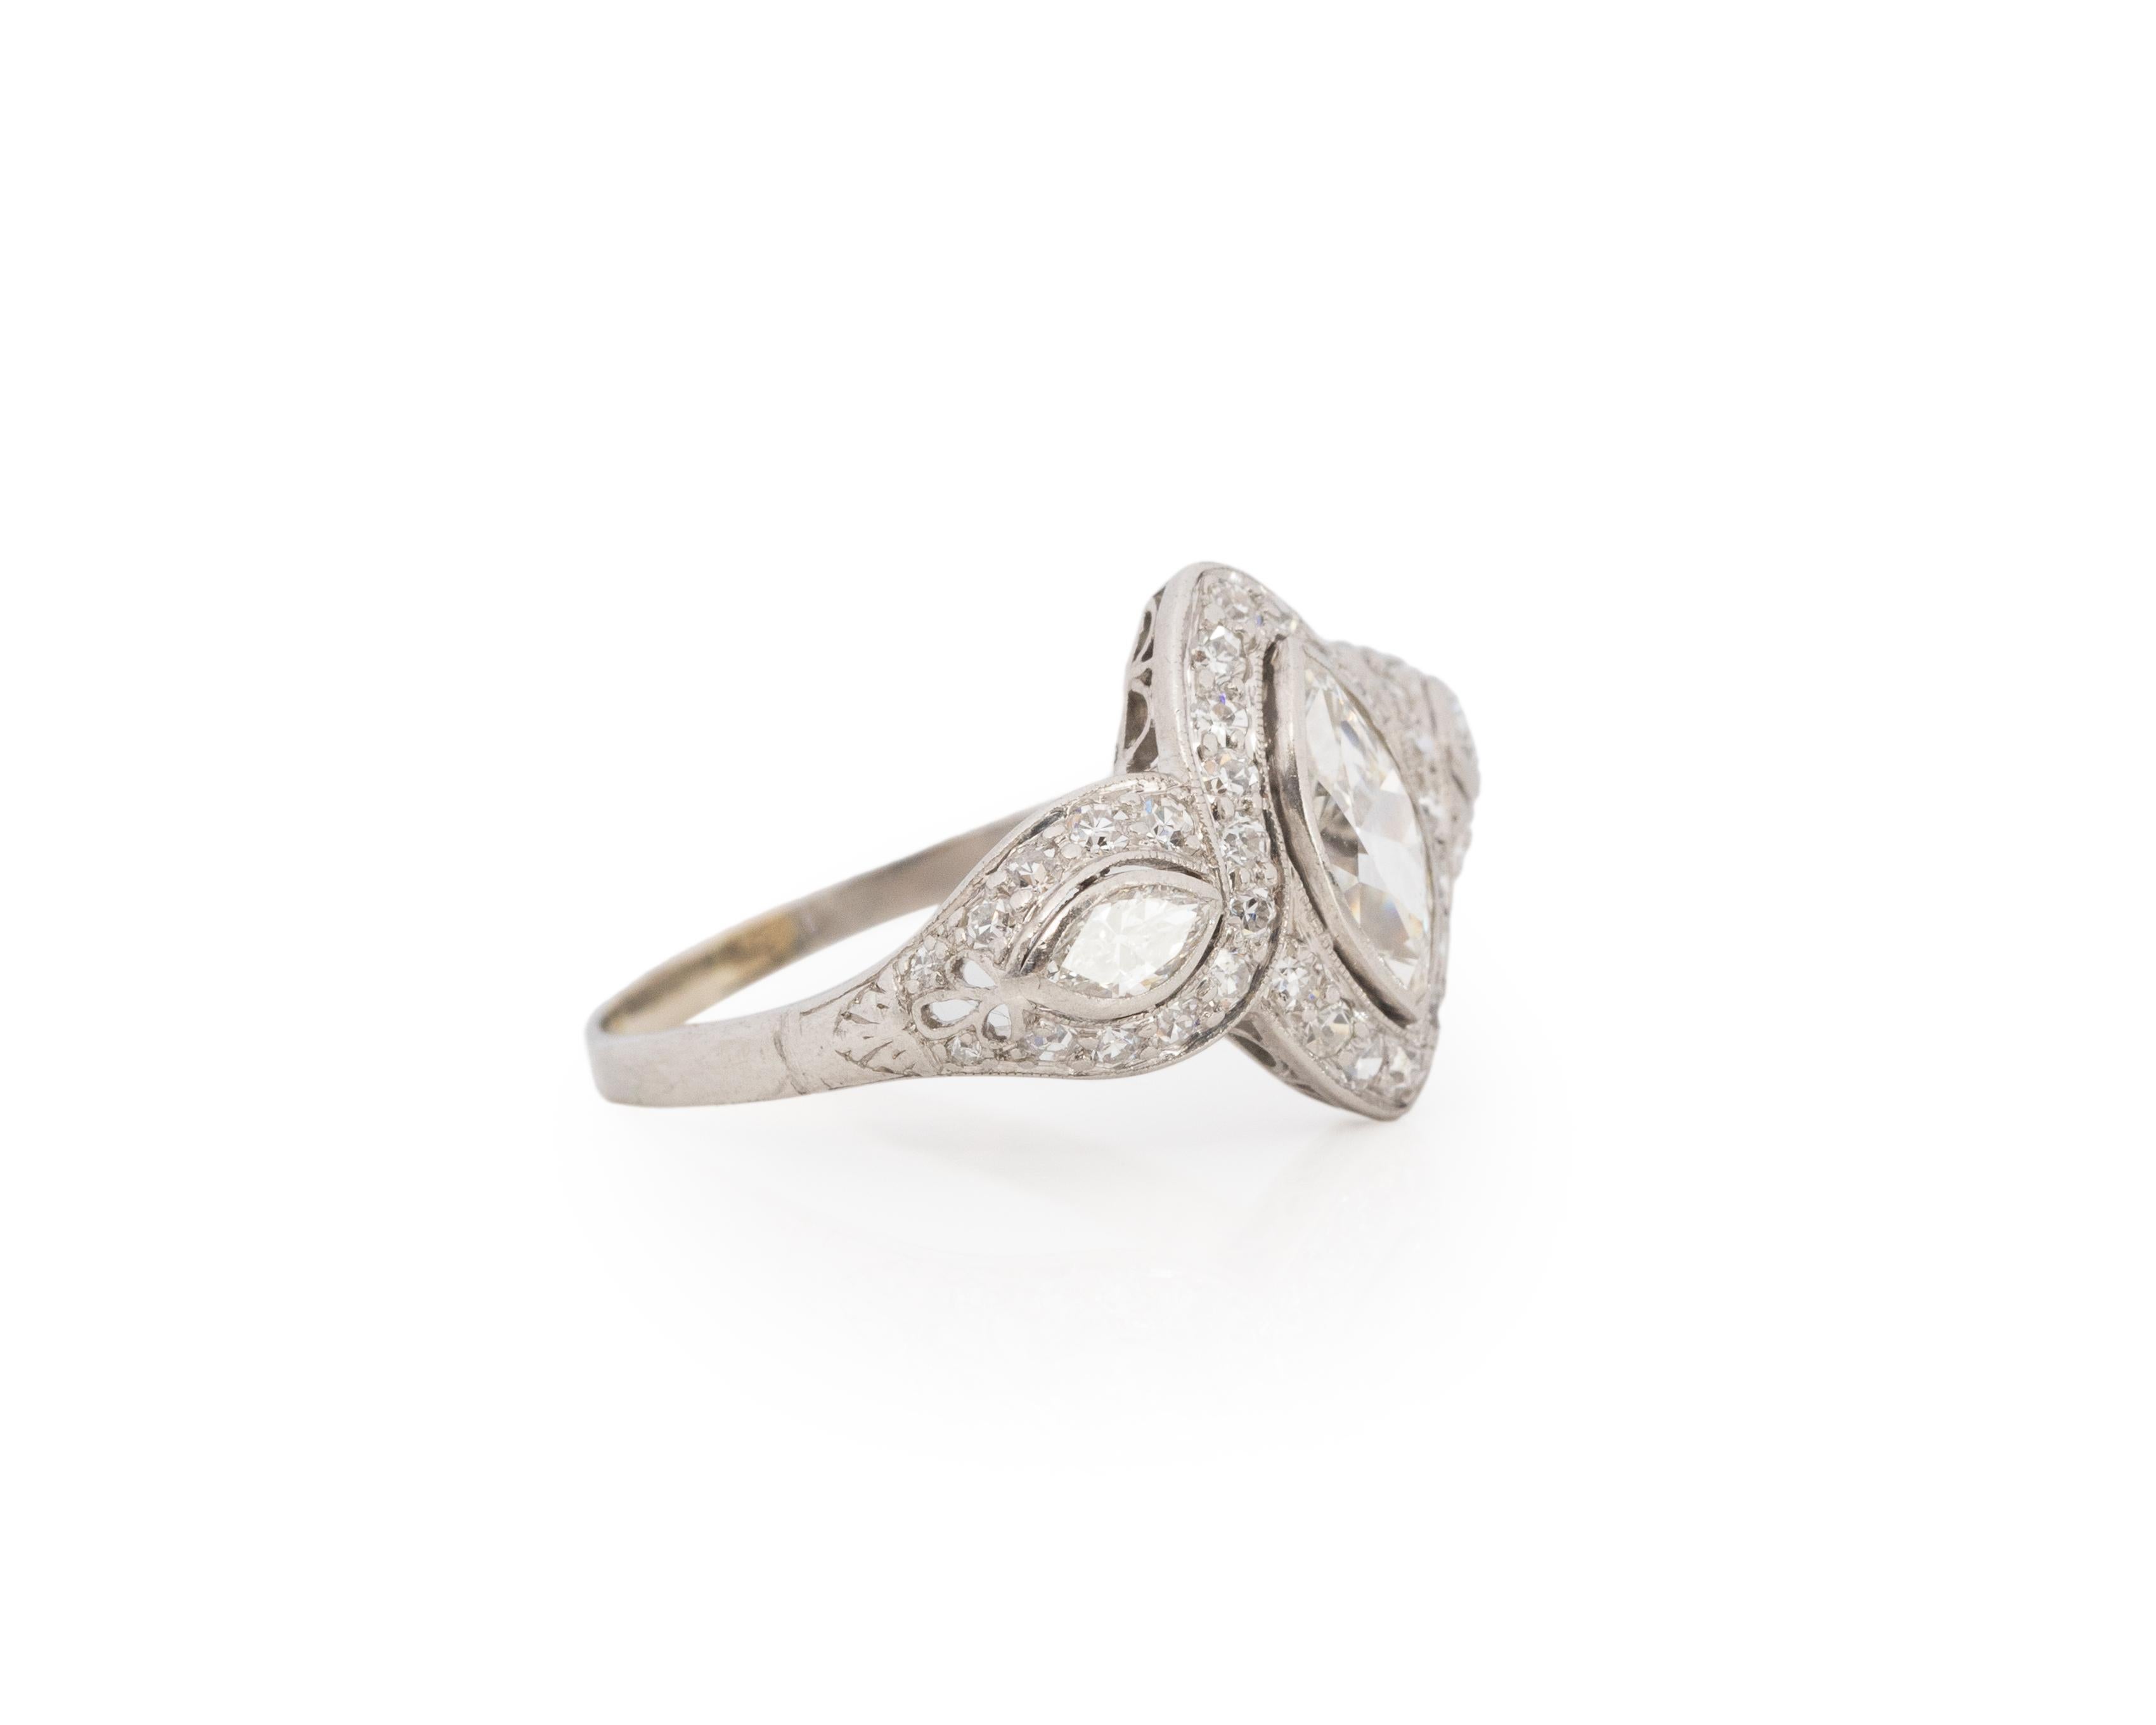 Ring Size: 8.25
Metal Type: Platinum [Hallmarked, and Tested]
Weight: 4.8 grams

Center Diamond Details:
Weight: .80ct
Cut: Antique Marquise
Color: F
Clarity: VS

Side Diamond Details:
Weight: 1.00ct, total
Cut: Old European brilliant & Antique